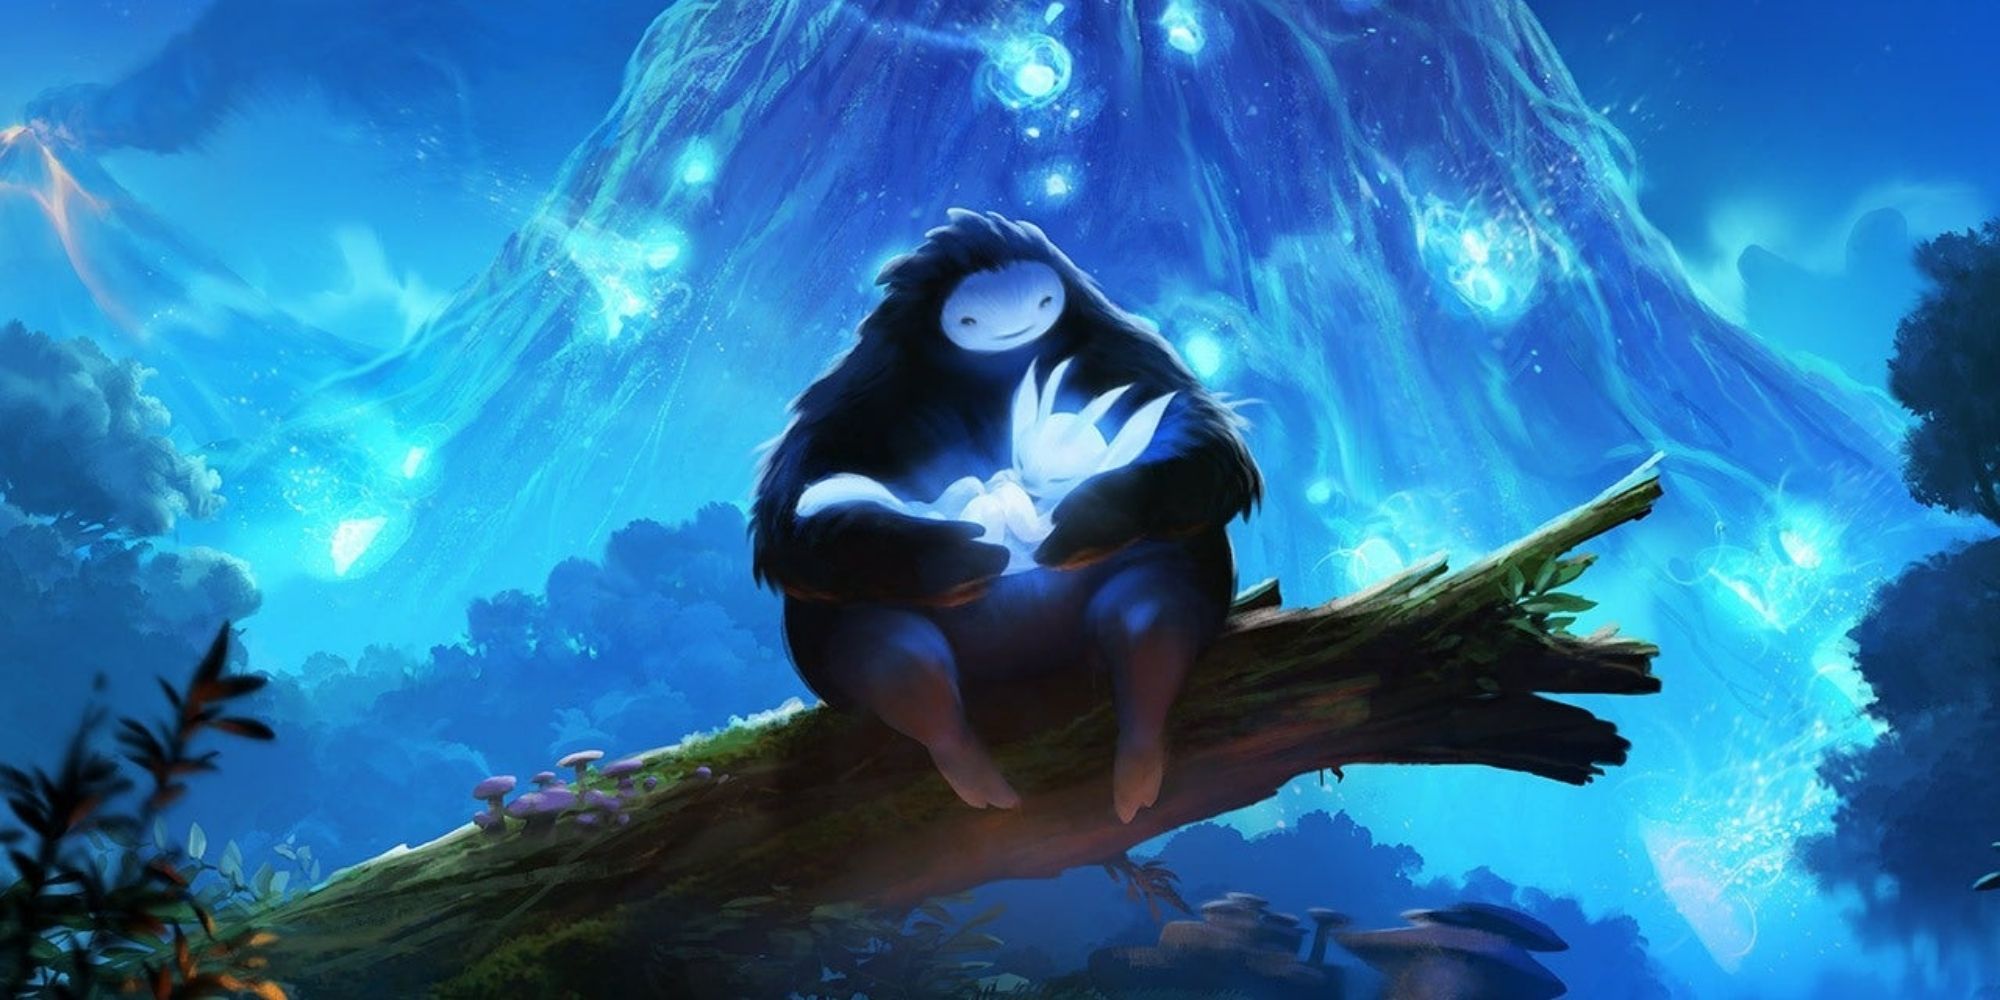 Ori And The Blind Forest Naru Holds Ori In Front Of The Night Sky